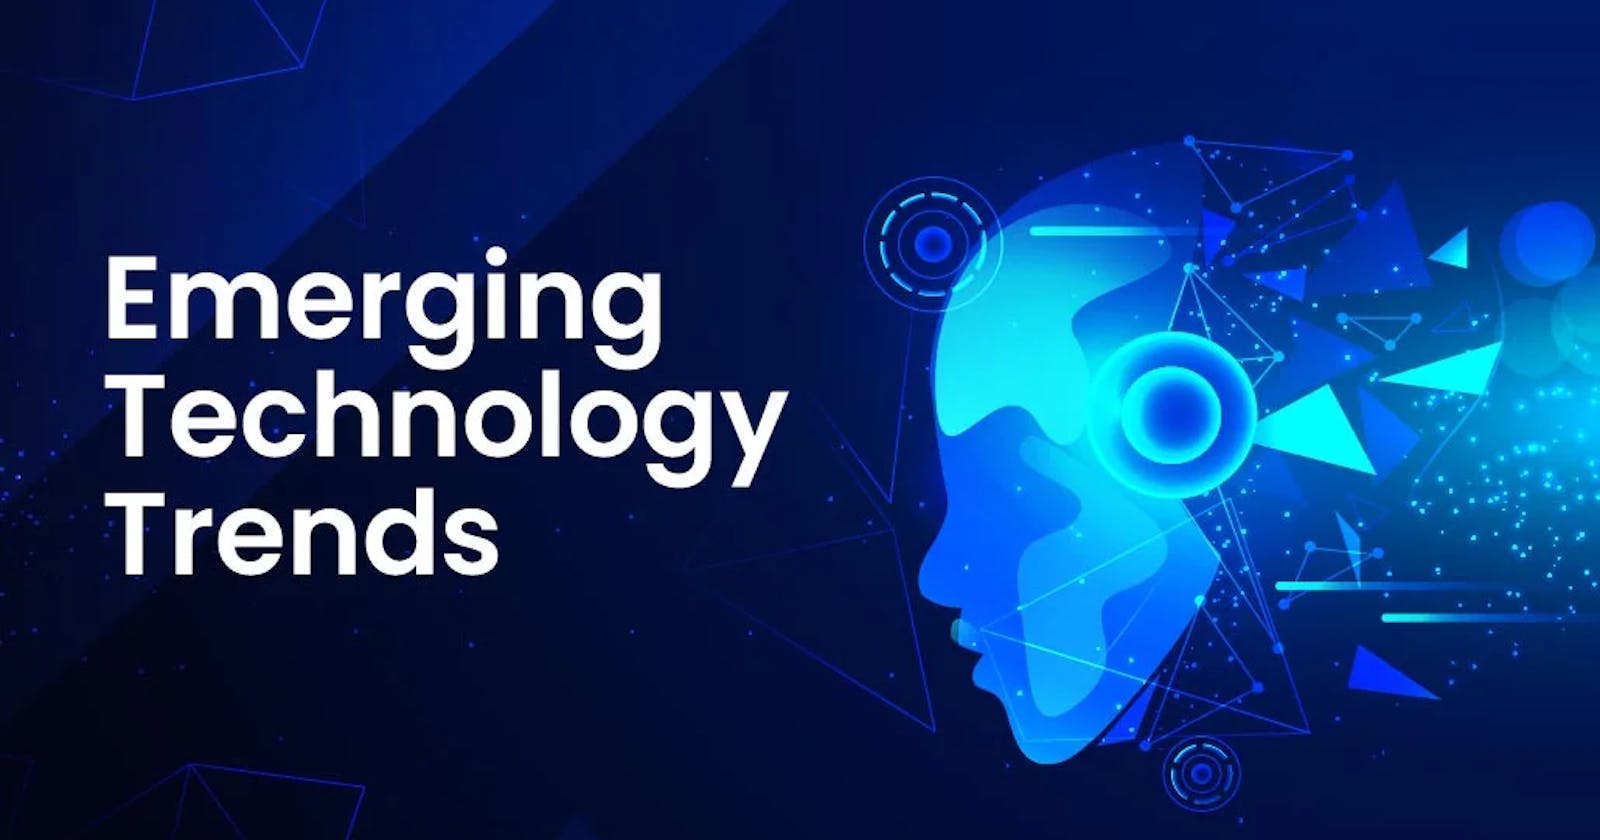 Emerging Technologies: The Key to the Future